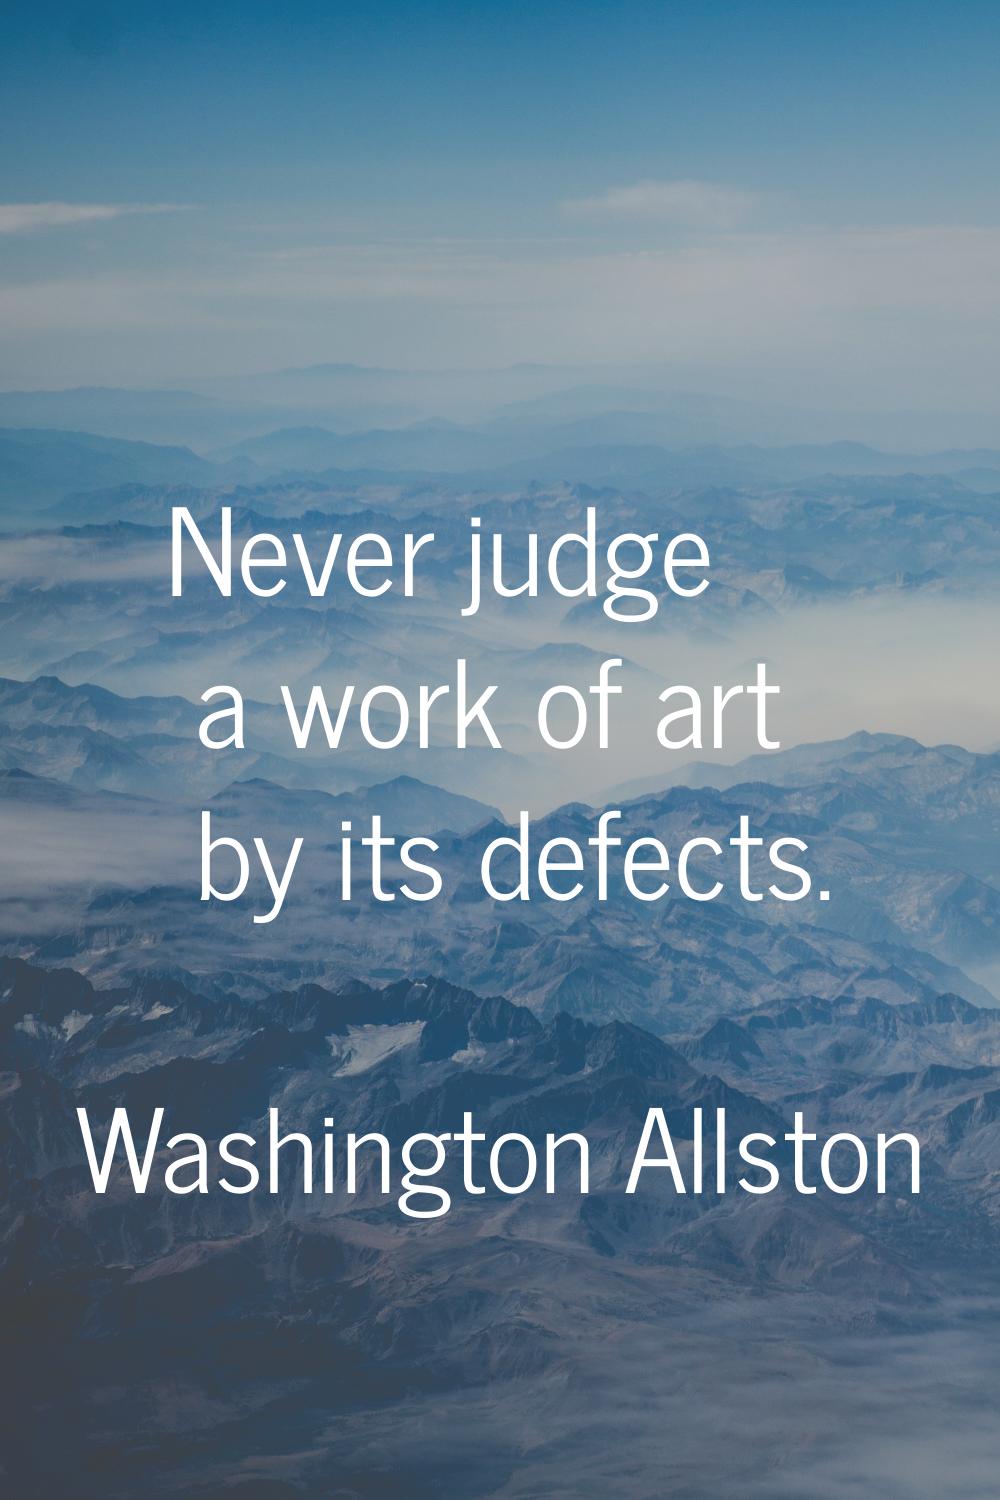 Never judge a work of art by its defects.